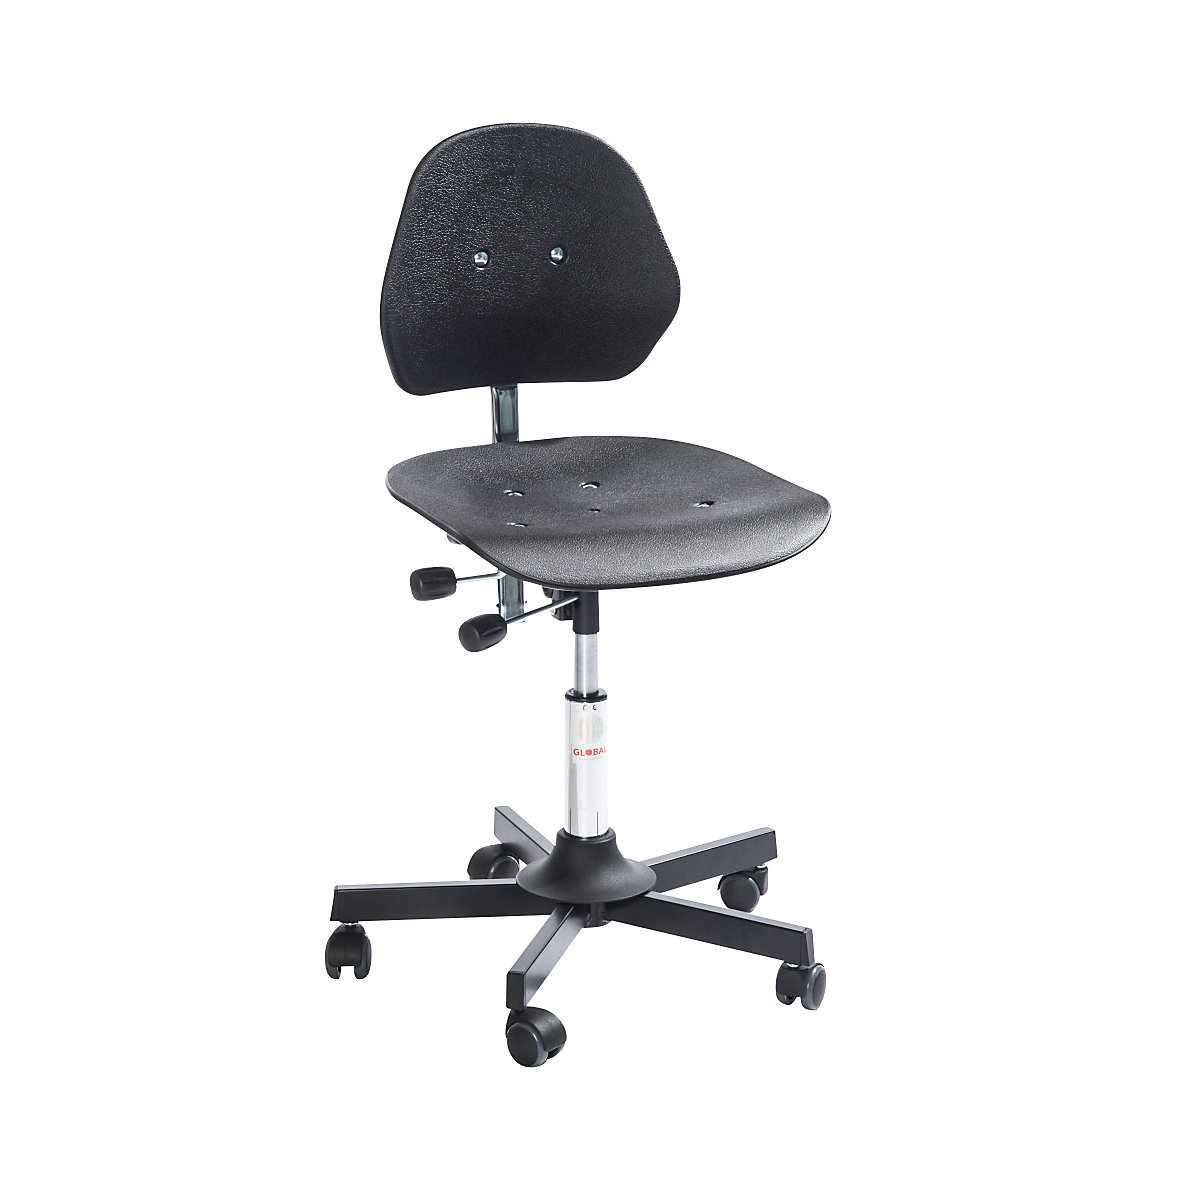 SOLID industrial swivel chair